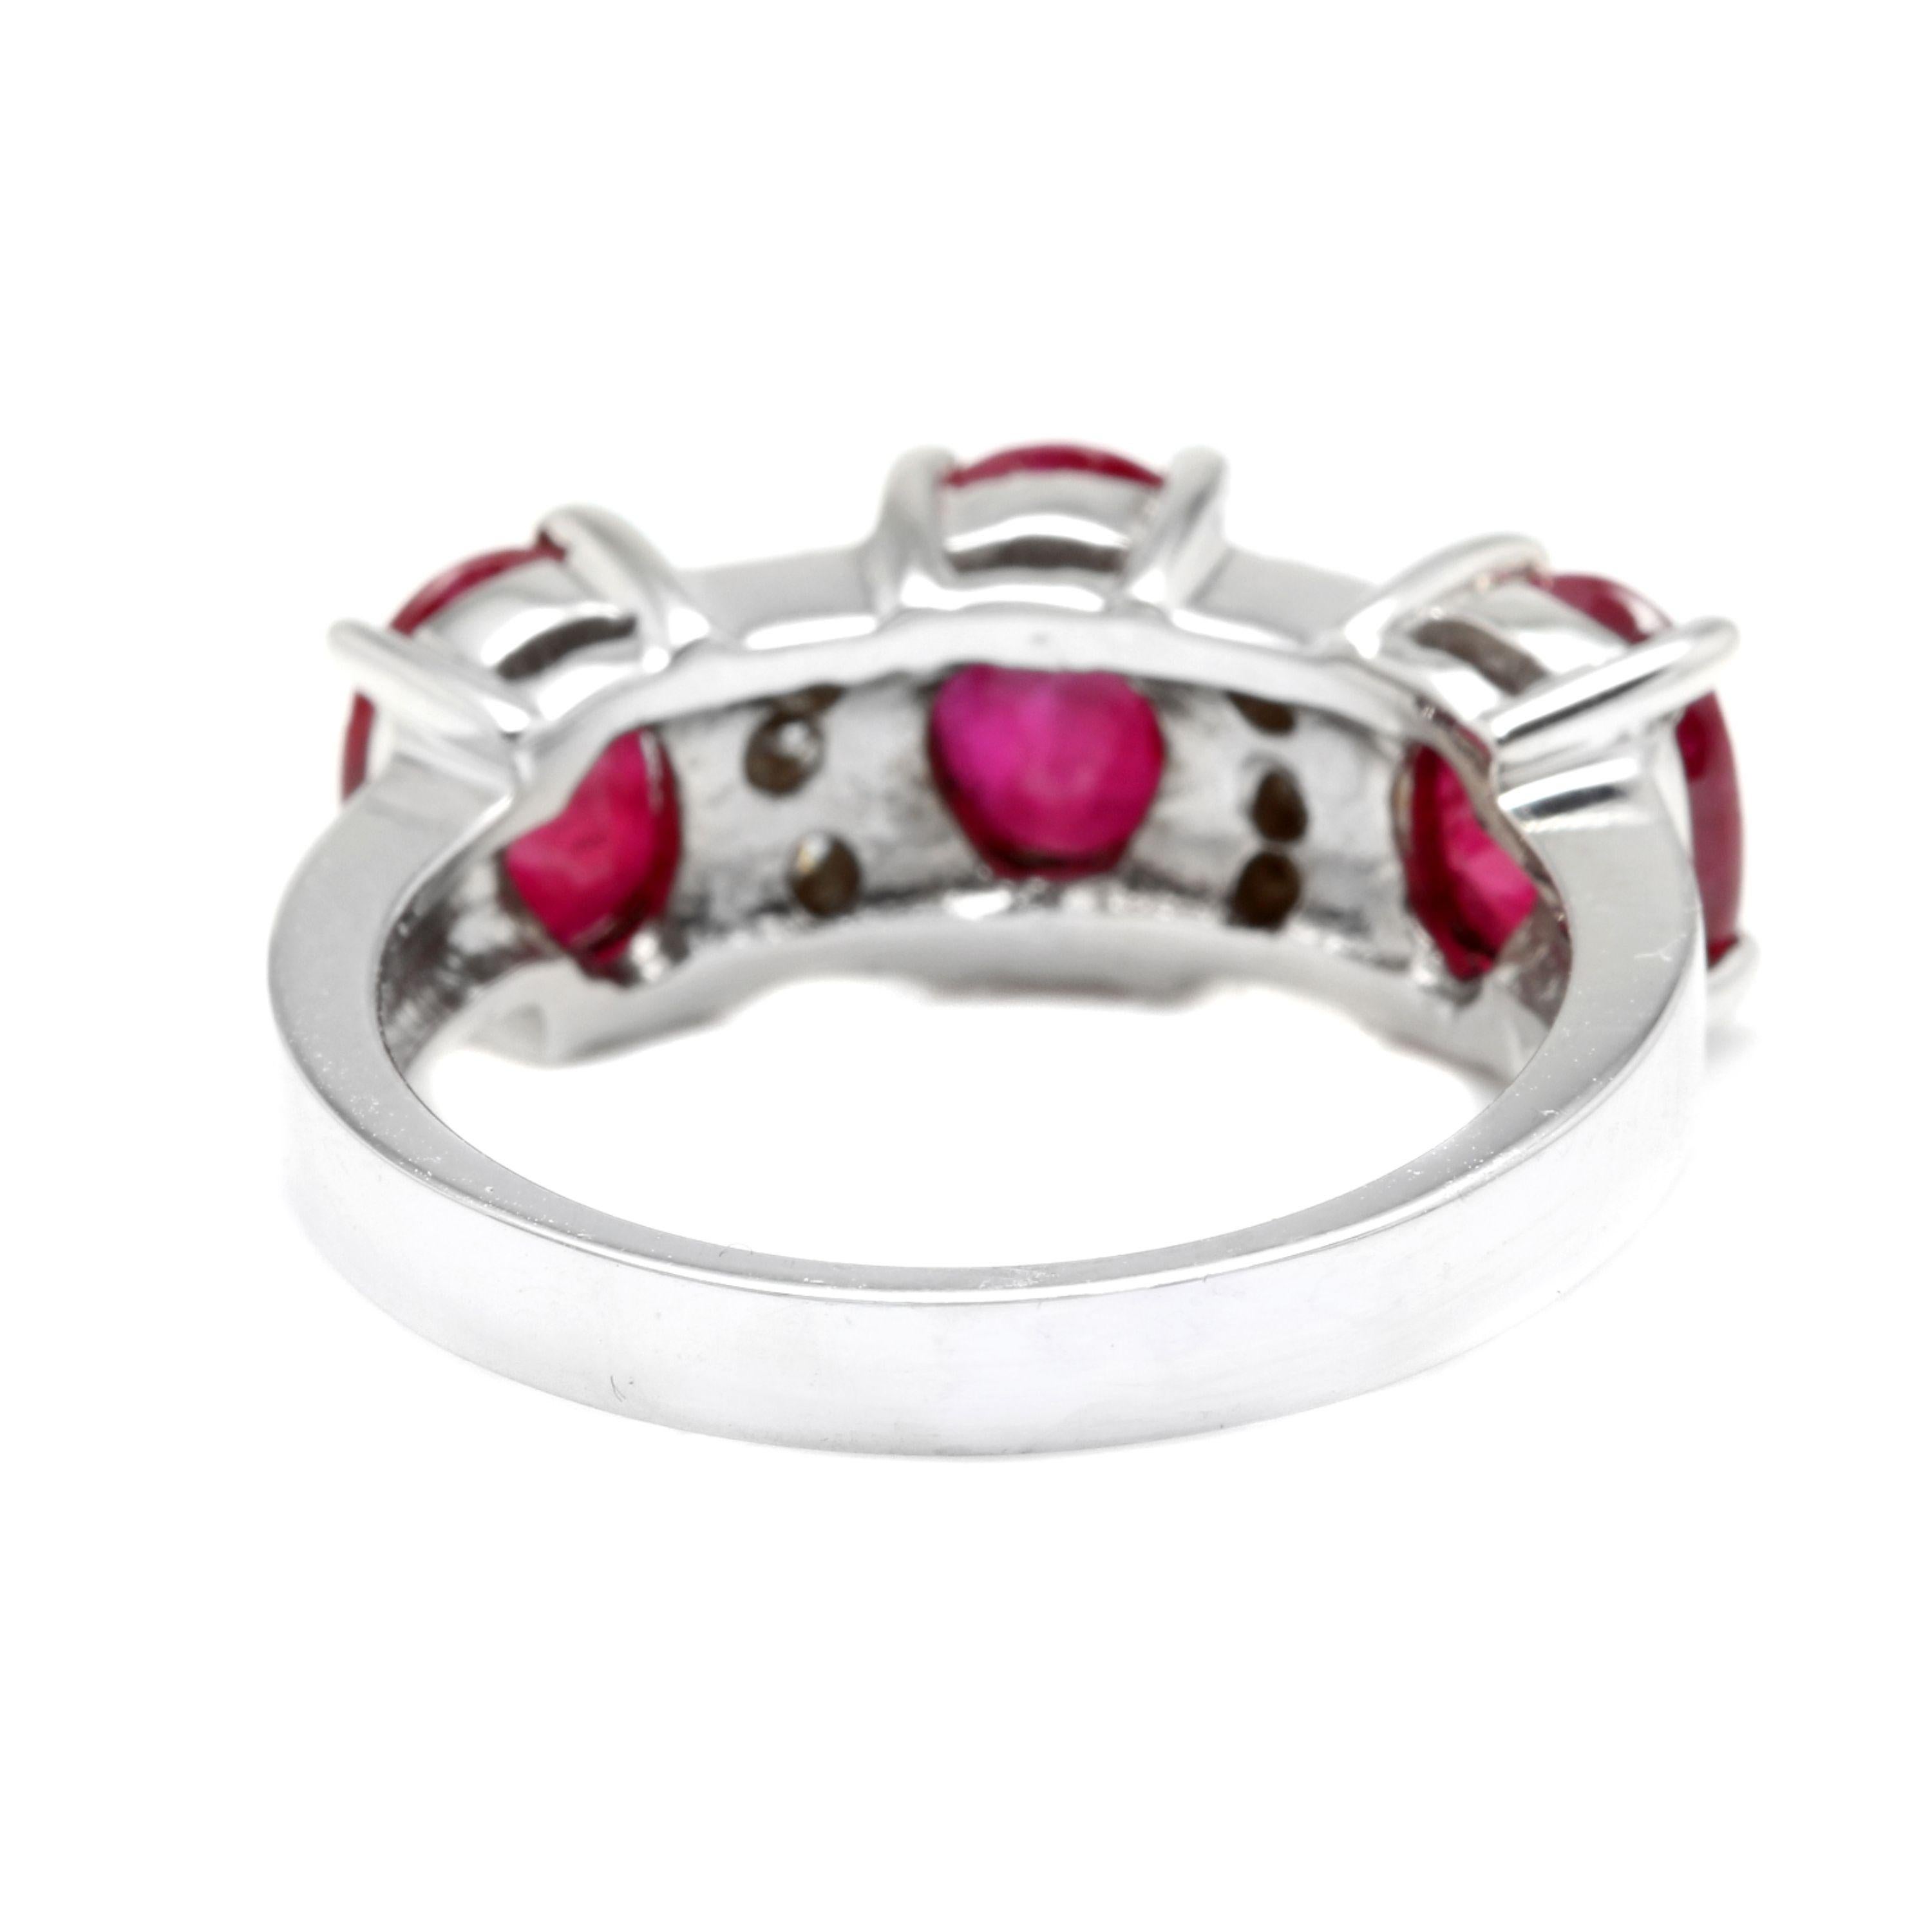 4.15 Carats Impressive Natural Red Ruby and Diamond 14 Karat White Gold Ring In New Condition For Sale In Los Angeles, CA